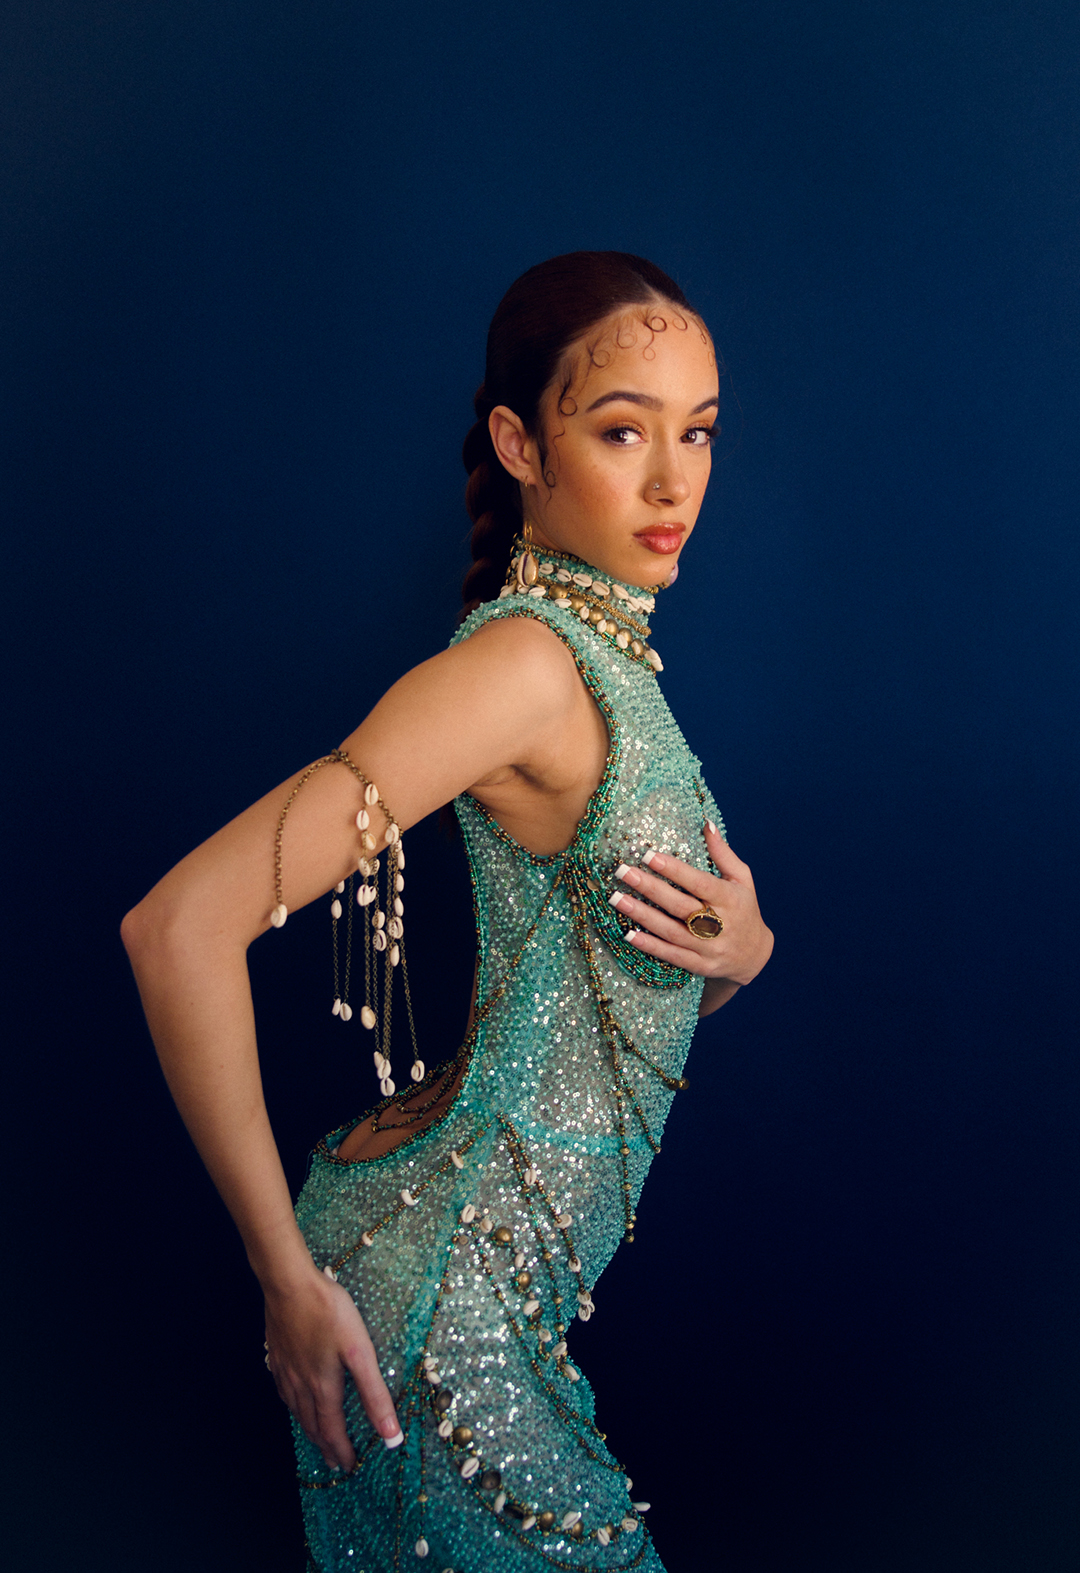 Detailed side view of a model wearing a turquoise beaded dress. One of the model's hands is on her breast and the other one is on her hip. The background is navy blue.